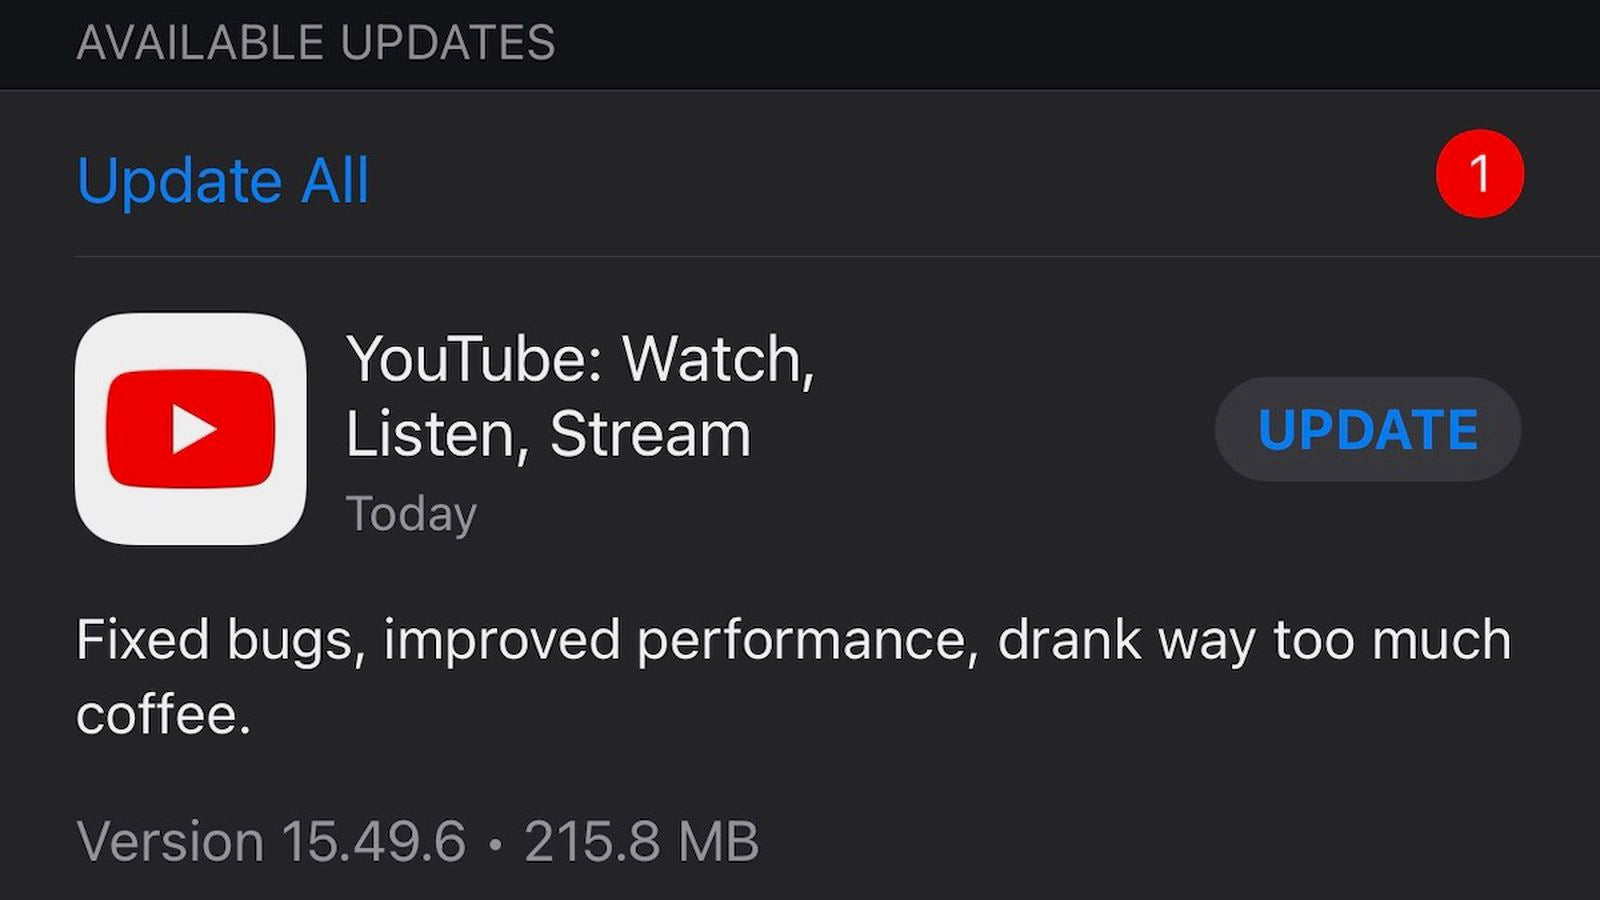 New YouTube app update available on iOS